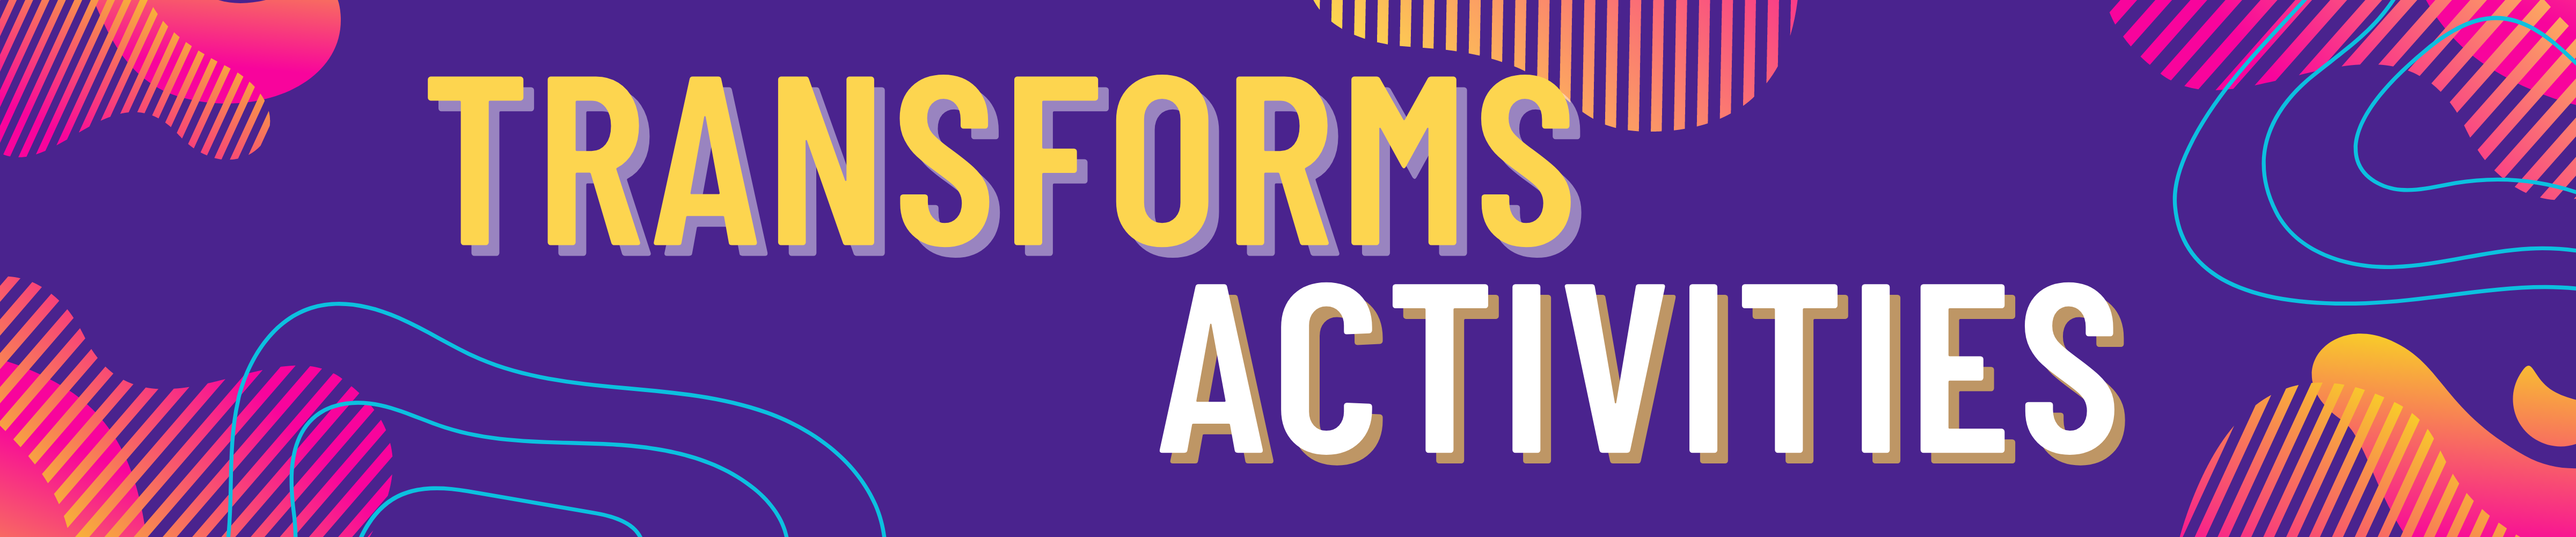 A Digital banner with a dark purple background and bright blob shapes in the corners that fade from fuchsia to gold. There are yellow topographic lines as accents. To the right, in yellow and white letters, Transforms Activities.